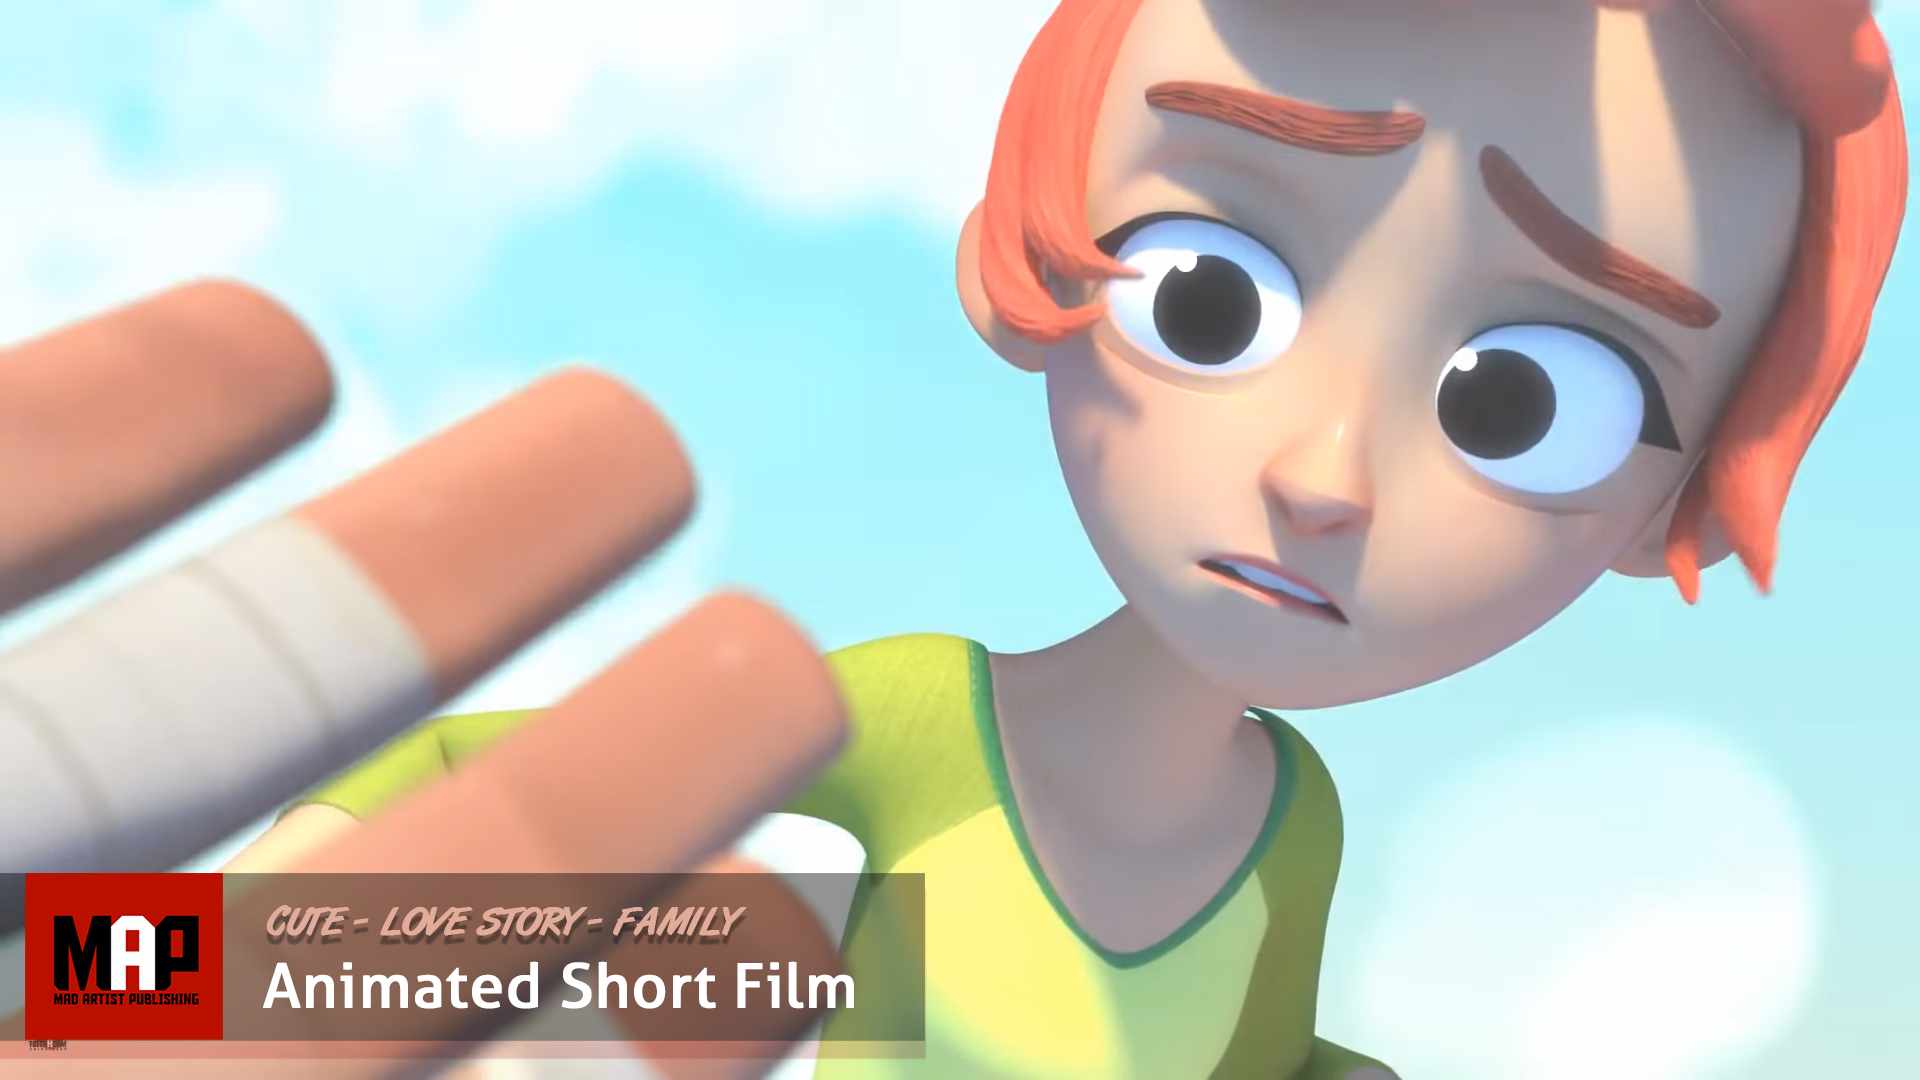 CGI 3D Animated Short Film ** JINXY JENKINS & LUCY ** Cute Romantic Animation Love Story by Ringling